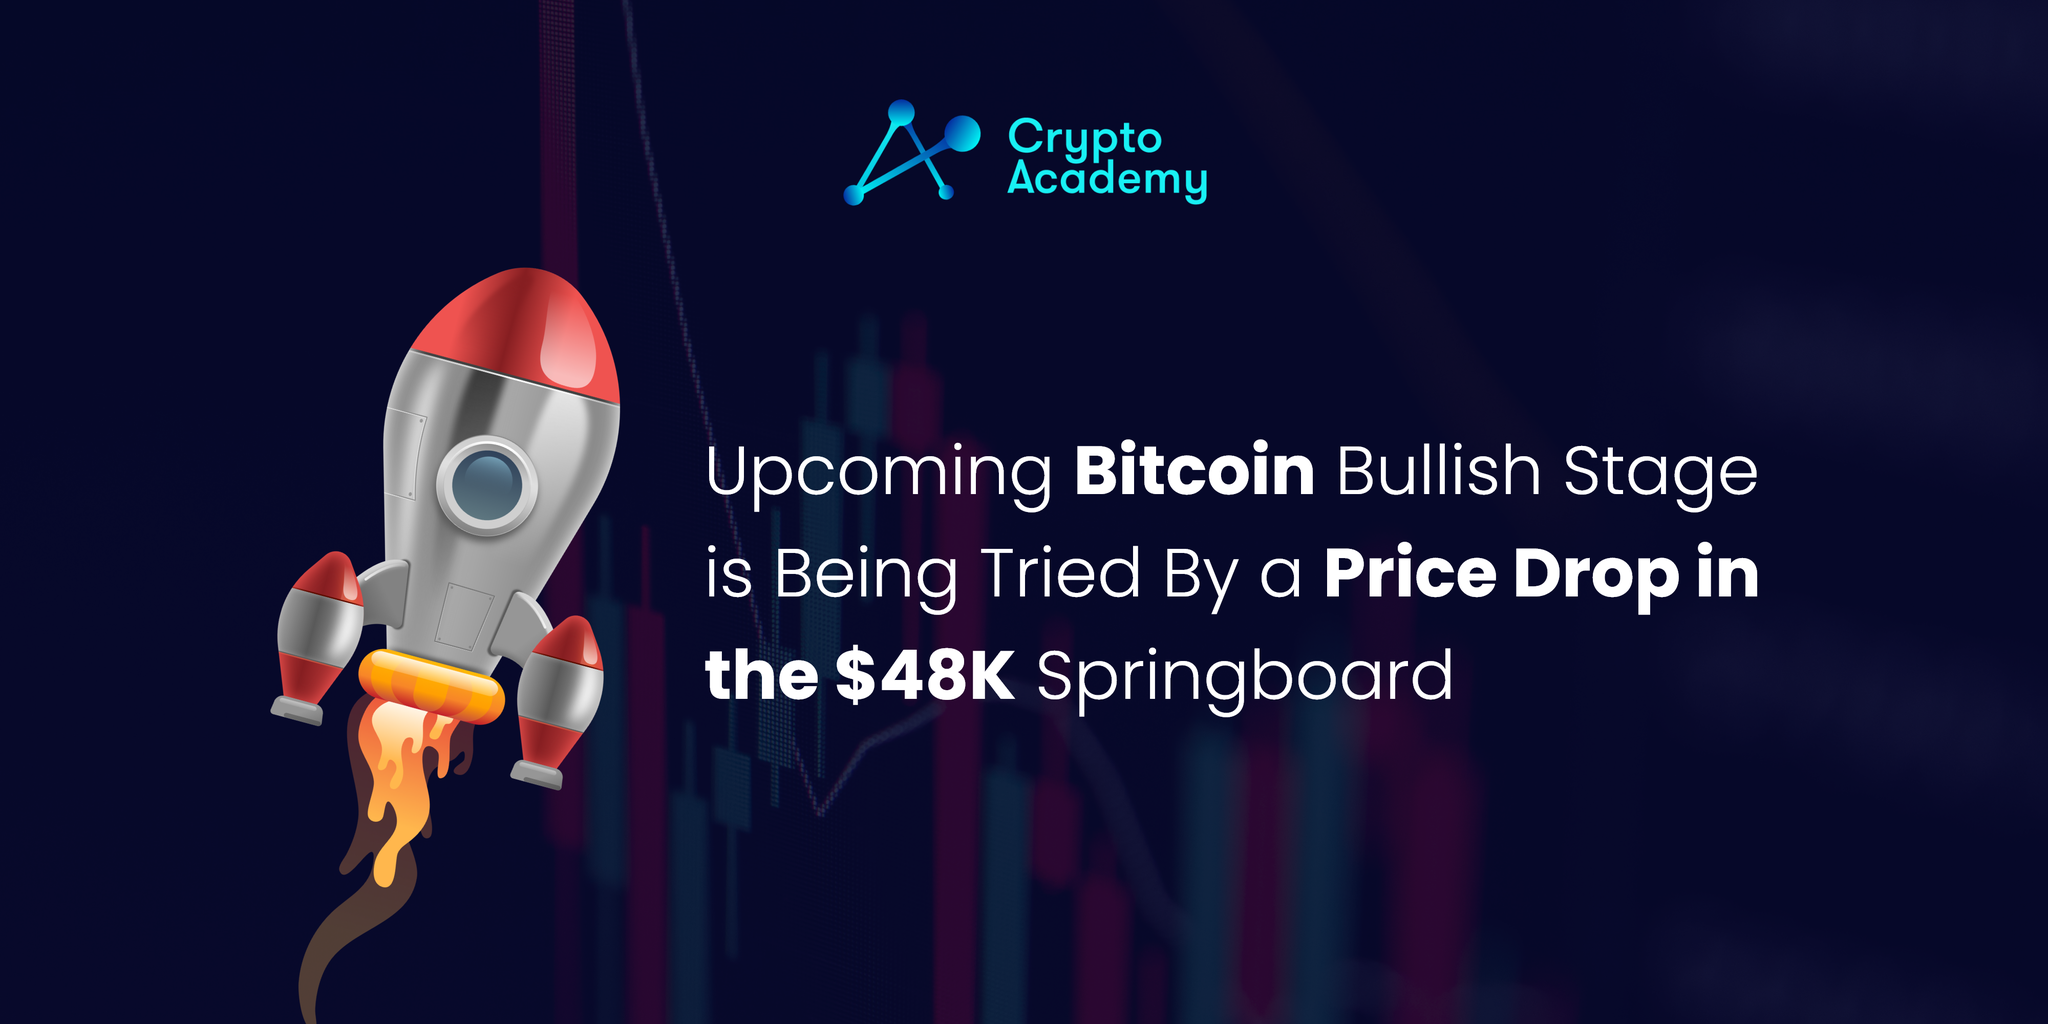 Upcoming Bitcoin Bullish Stage is Being Tried By a Price Drop in the $48K Springboard